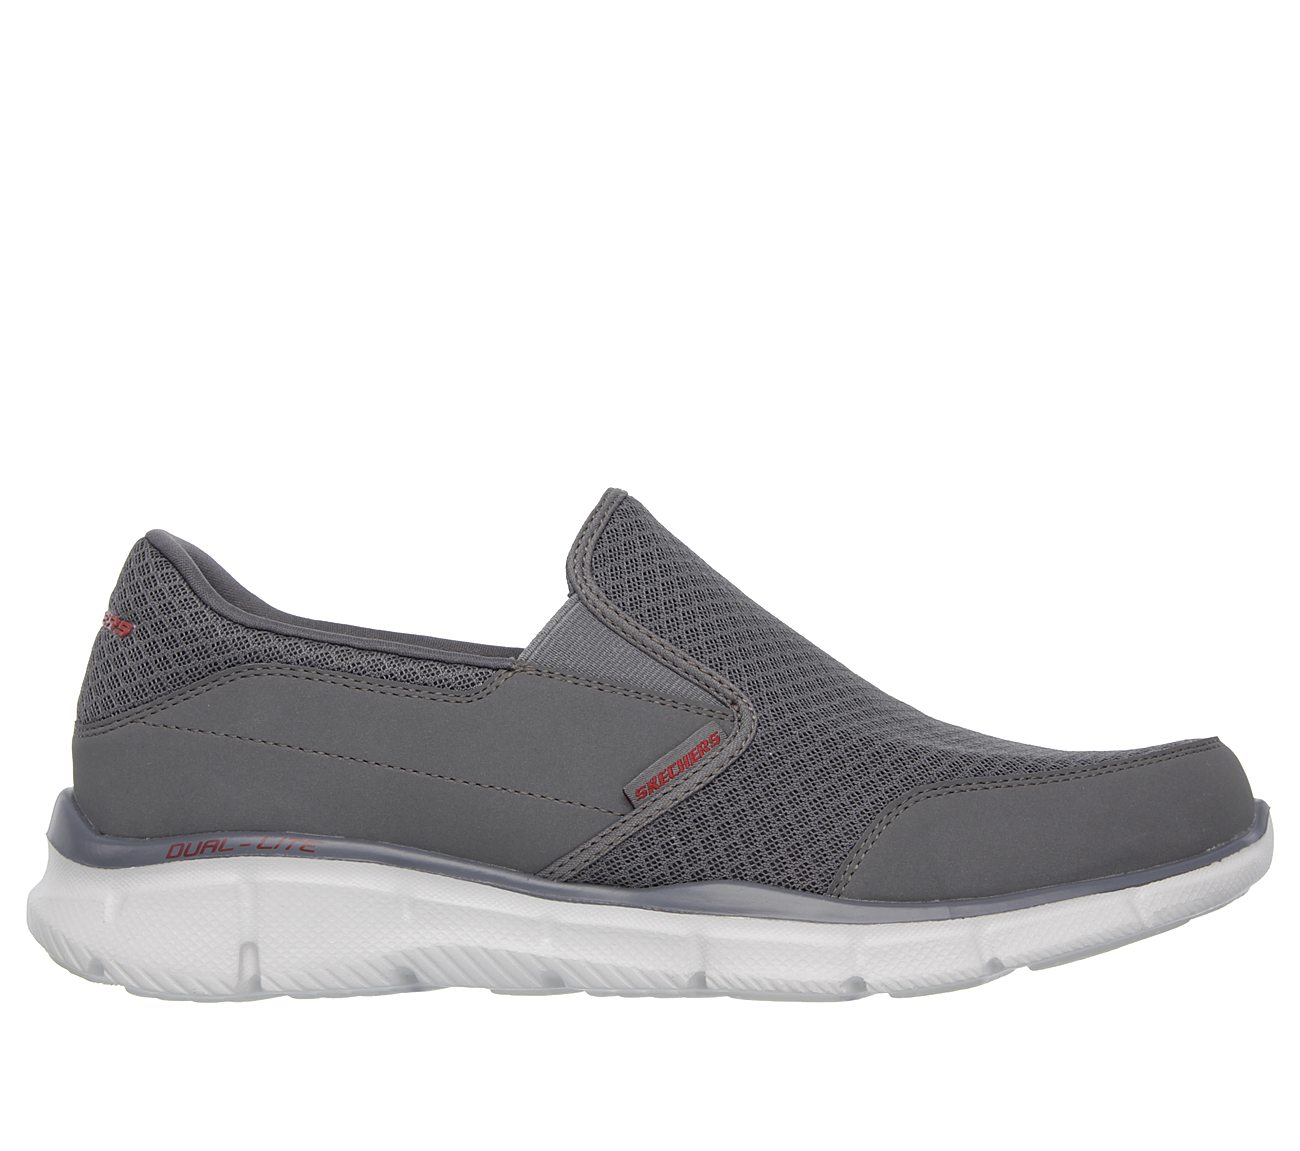 Buy SKECHERS Equalizer - Persistent Sport Shoes only $70.00